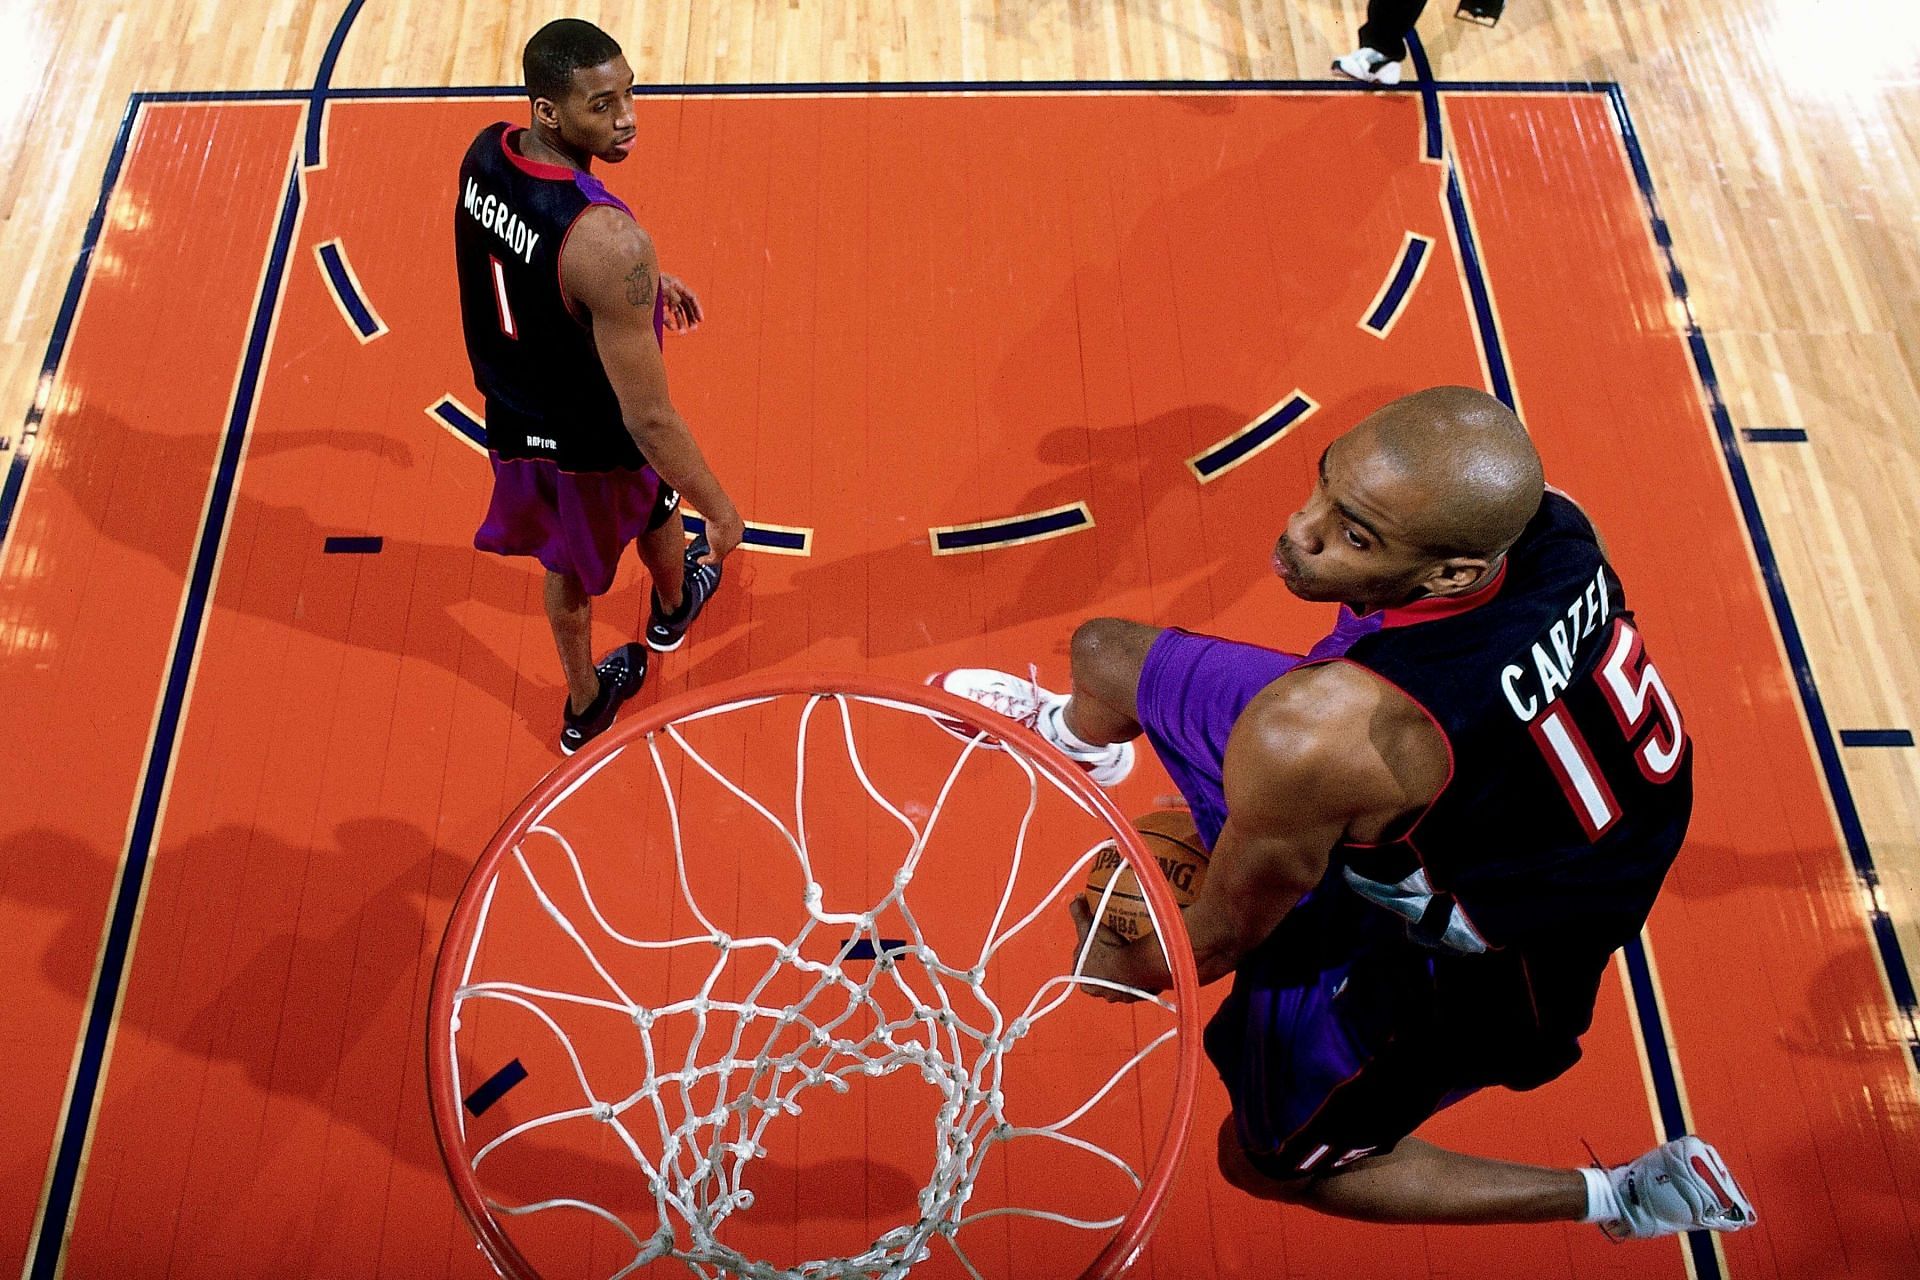 Vince Carter and Tracy McGrady brought the prestige back to the NBA Dunk Contest in 2000. [Photo: OpenCourt-Basketball]